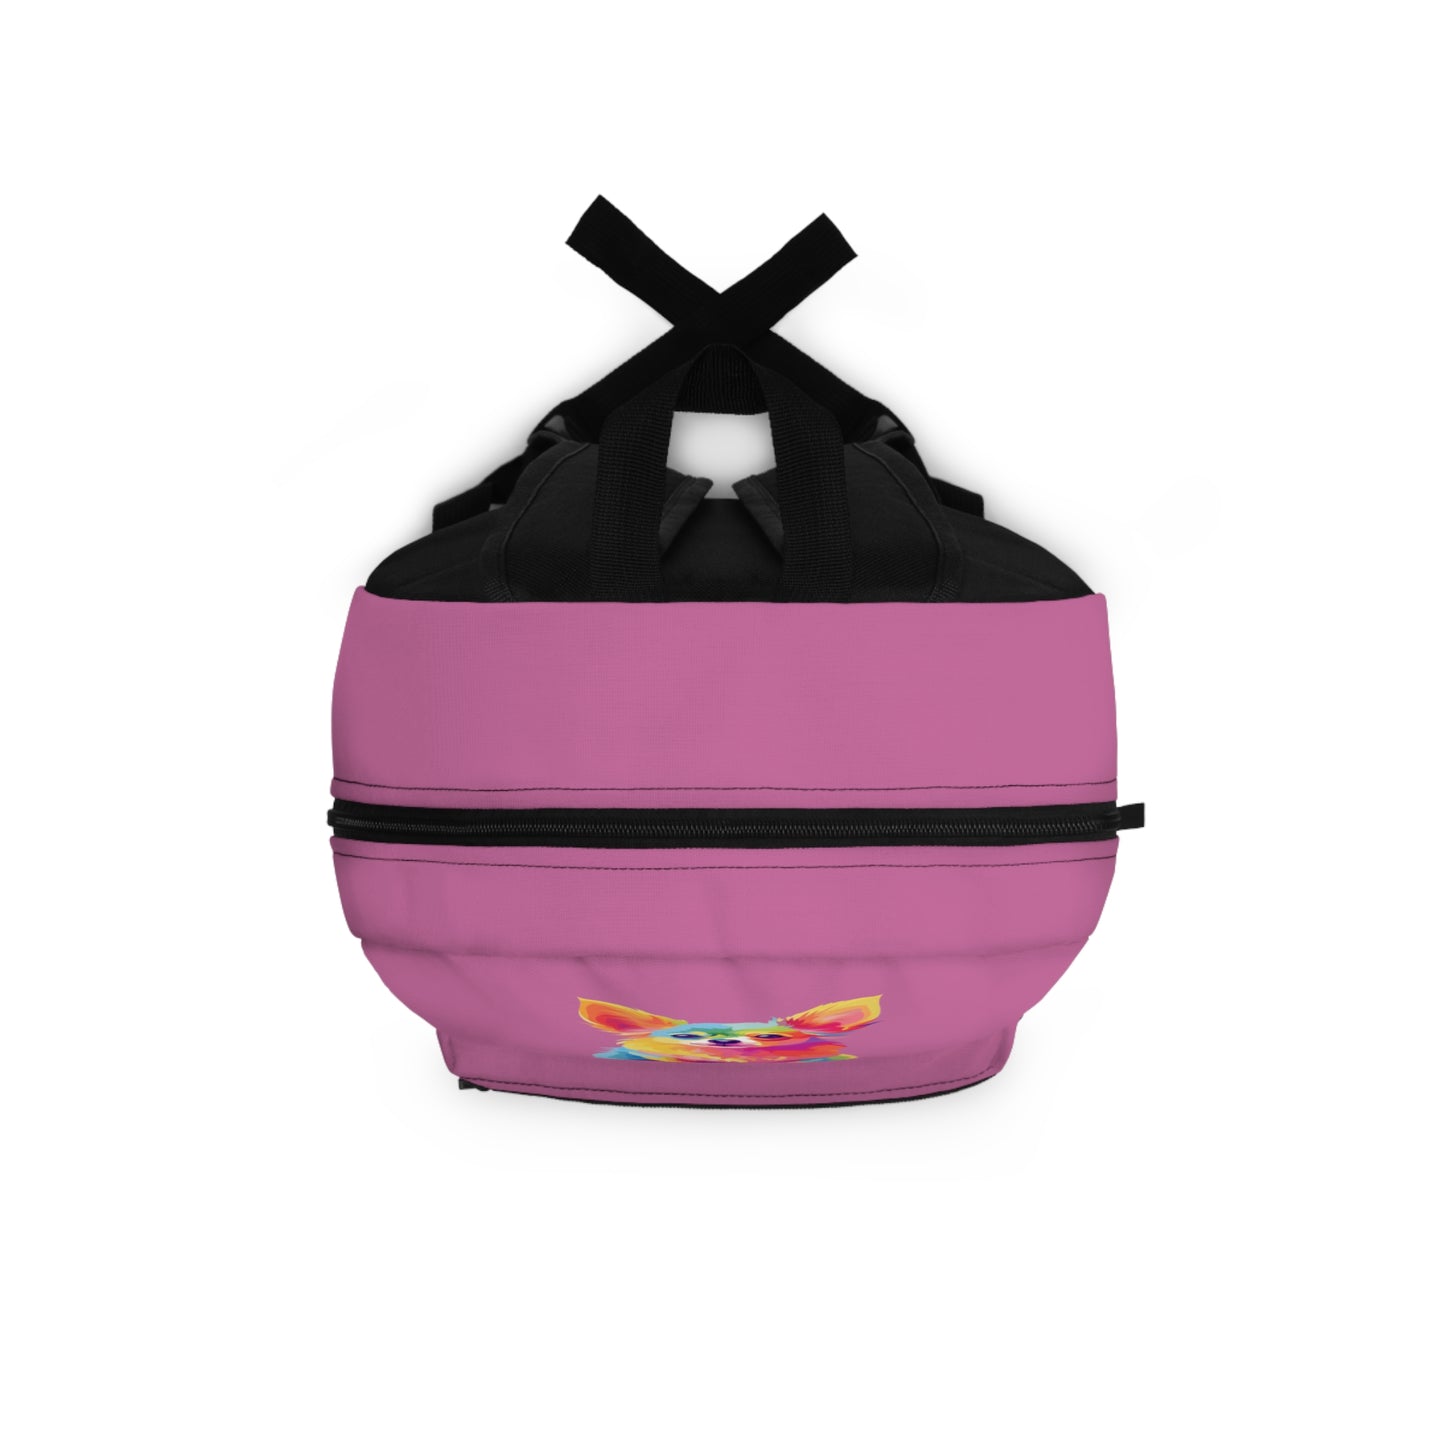 Chihuahua Doggie Things Pink Backpack